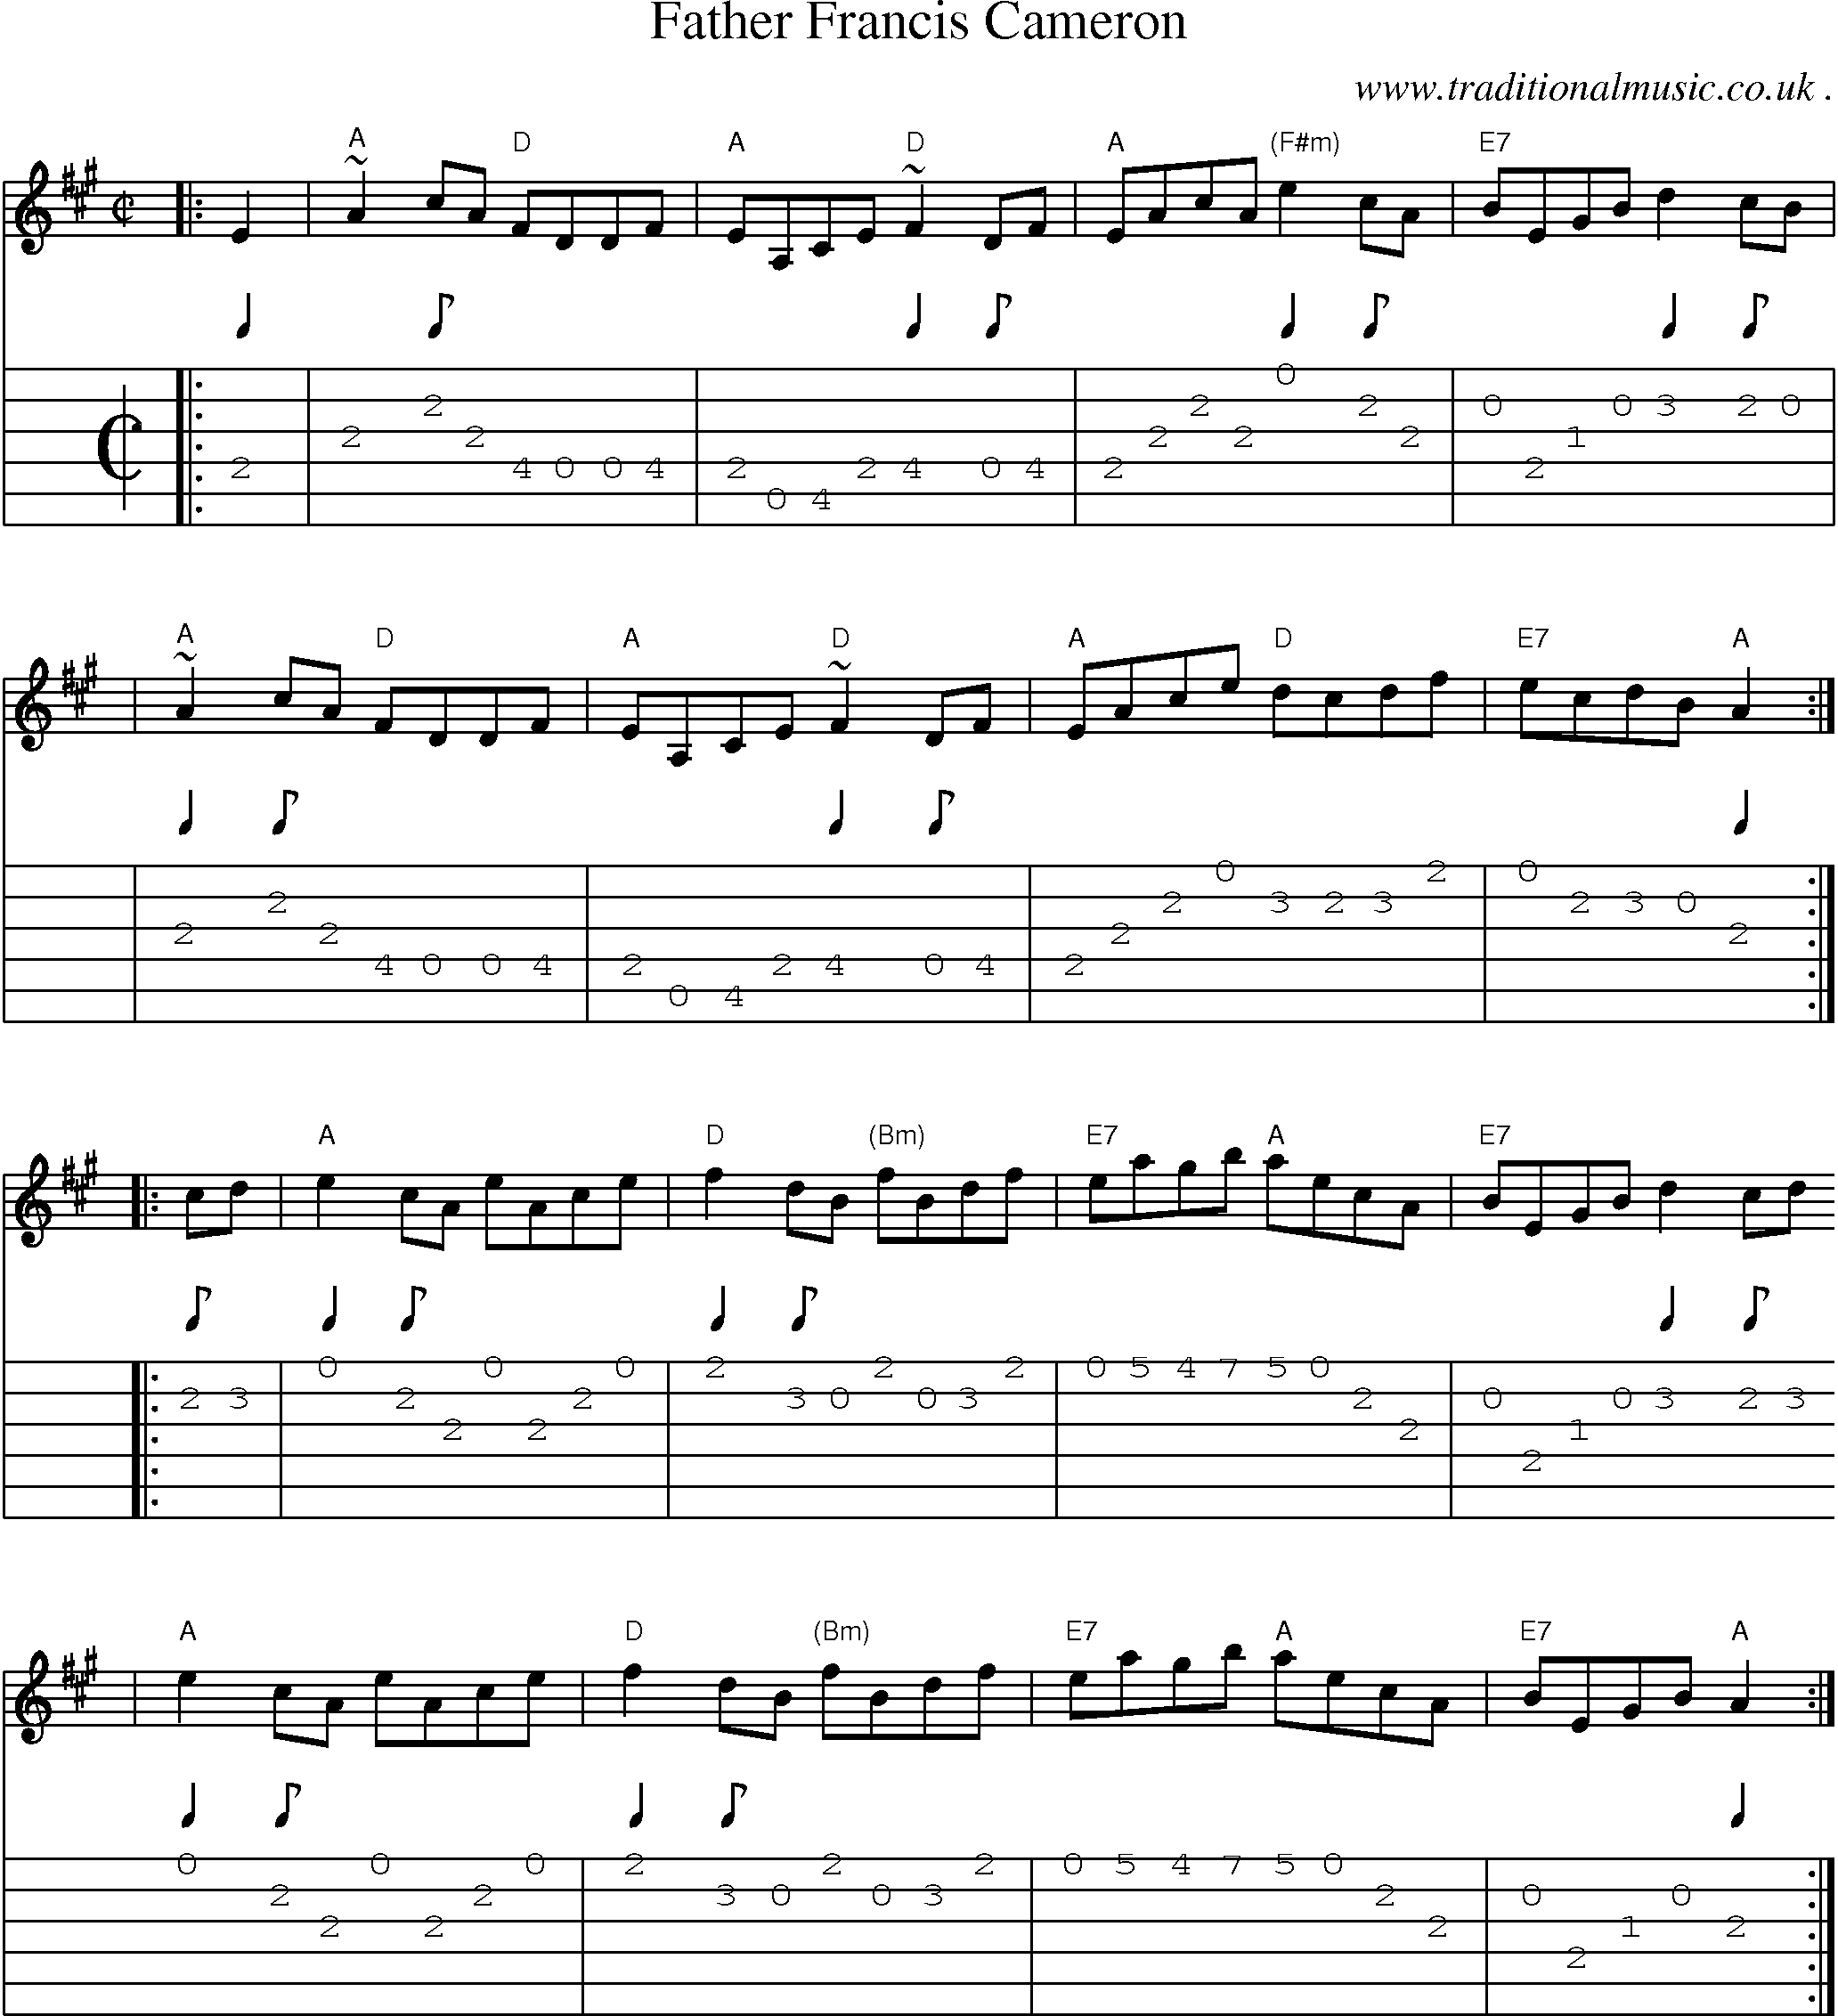 Sheet-music  score, Chords and Guitar Tabs for Father Francis Cameron